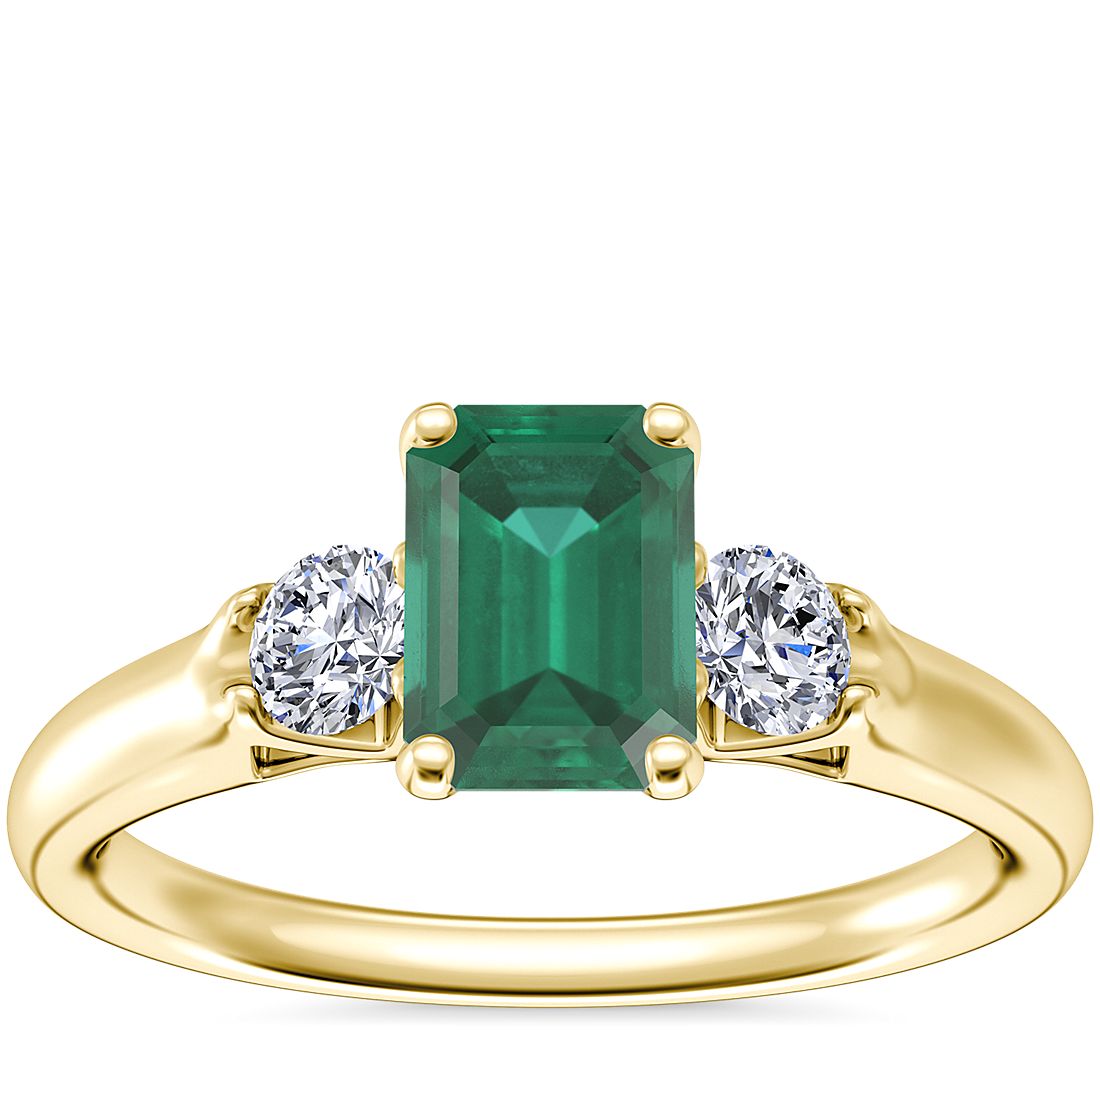 Classic Three Stone Engagement Ring with Emerald-Cut Emerald in 18k Yellow Gold (7x5mm)